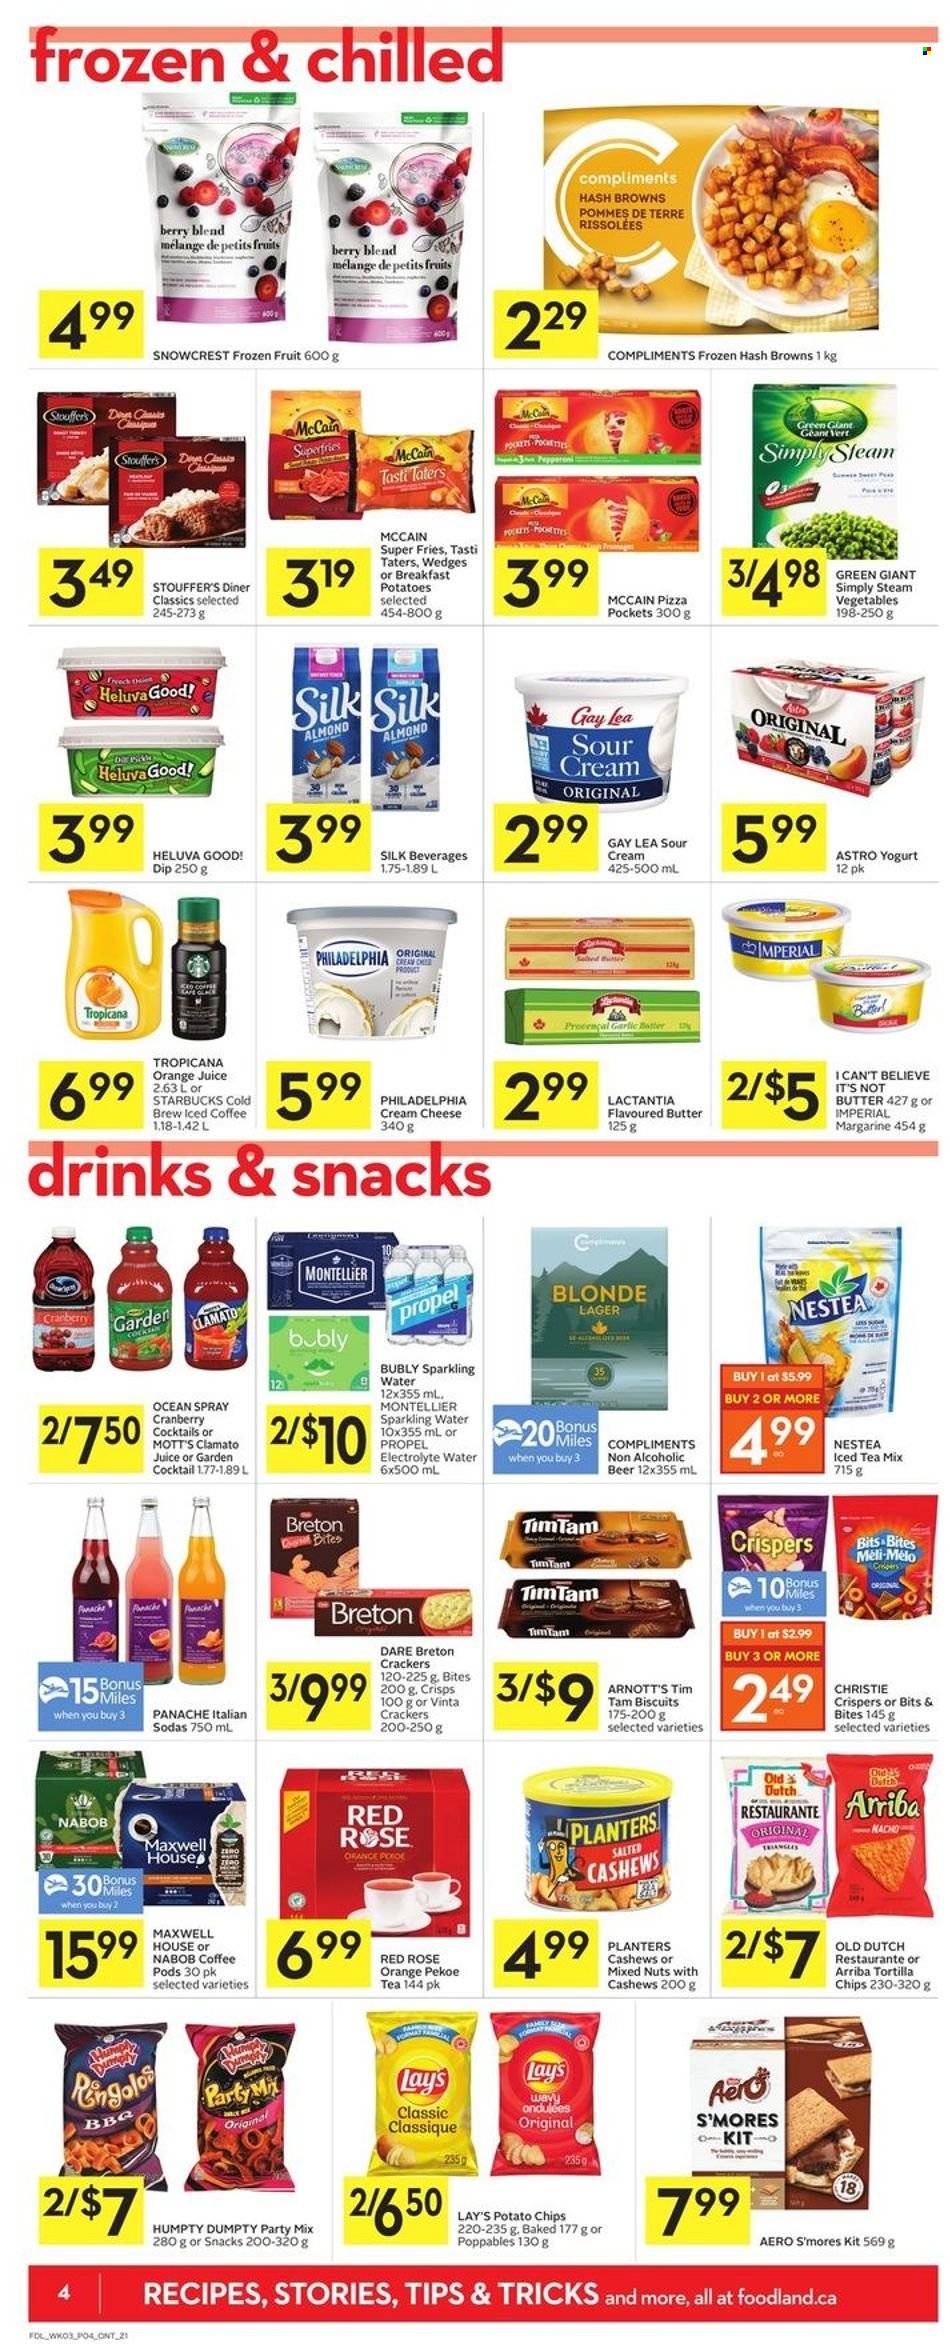 thumbnail - Foodland Flyer - May 19, 2022 - May 25, 2022 - Sales products - garlic, Mott's, pizza, cream cheese, yoghurt, Silk, butter, margarine, I Can't Believe It's Not Butter, sour cream, dip, Stouffer's, McCain, hash browns, potato fries, crackers, Tim Tam, biscuit, tortilla chips, potato chips, Lay’s, cashews, mixed nuts, Planters, orange juice, juice, ice tea, Clamato, sparkling water, iced coffee, Maxwell House, coffee pods, L'Or, Starbucks, wine, rosé wine, beer, Lager, Philadelphia. Page 4.